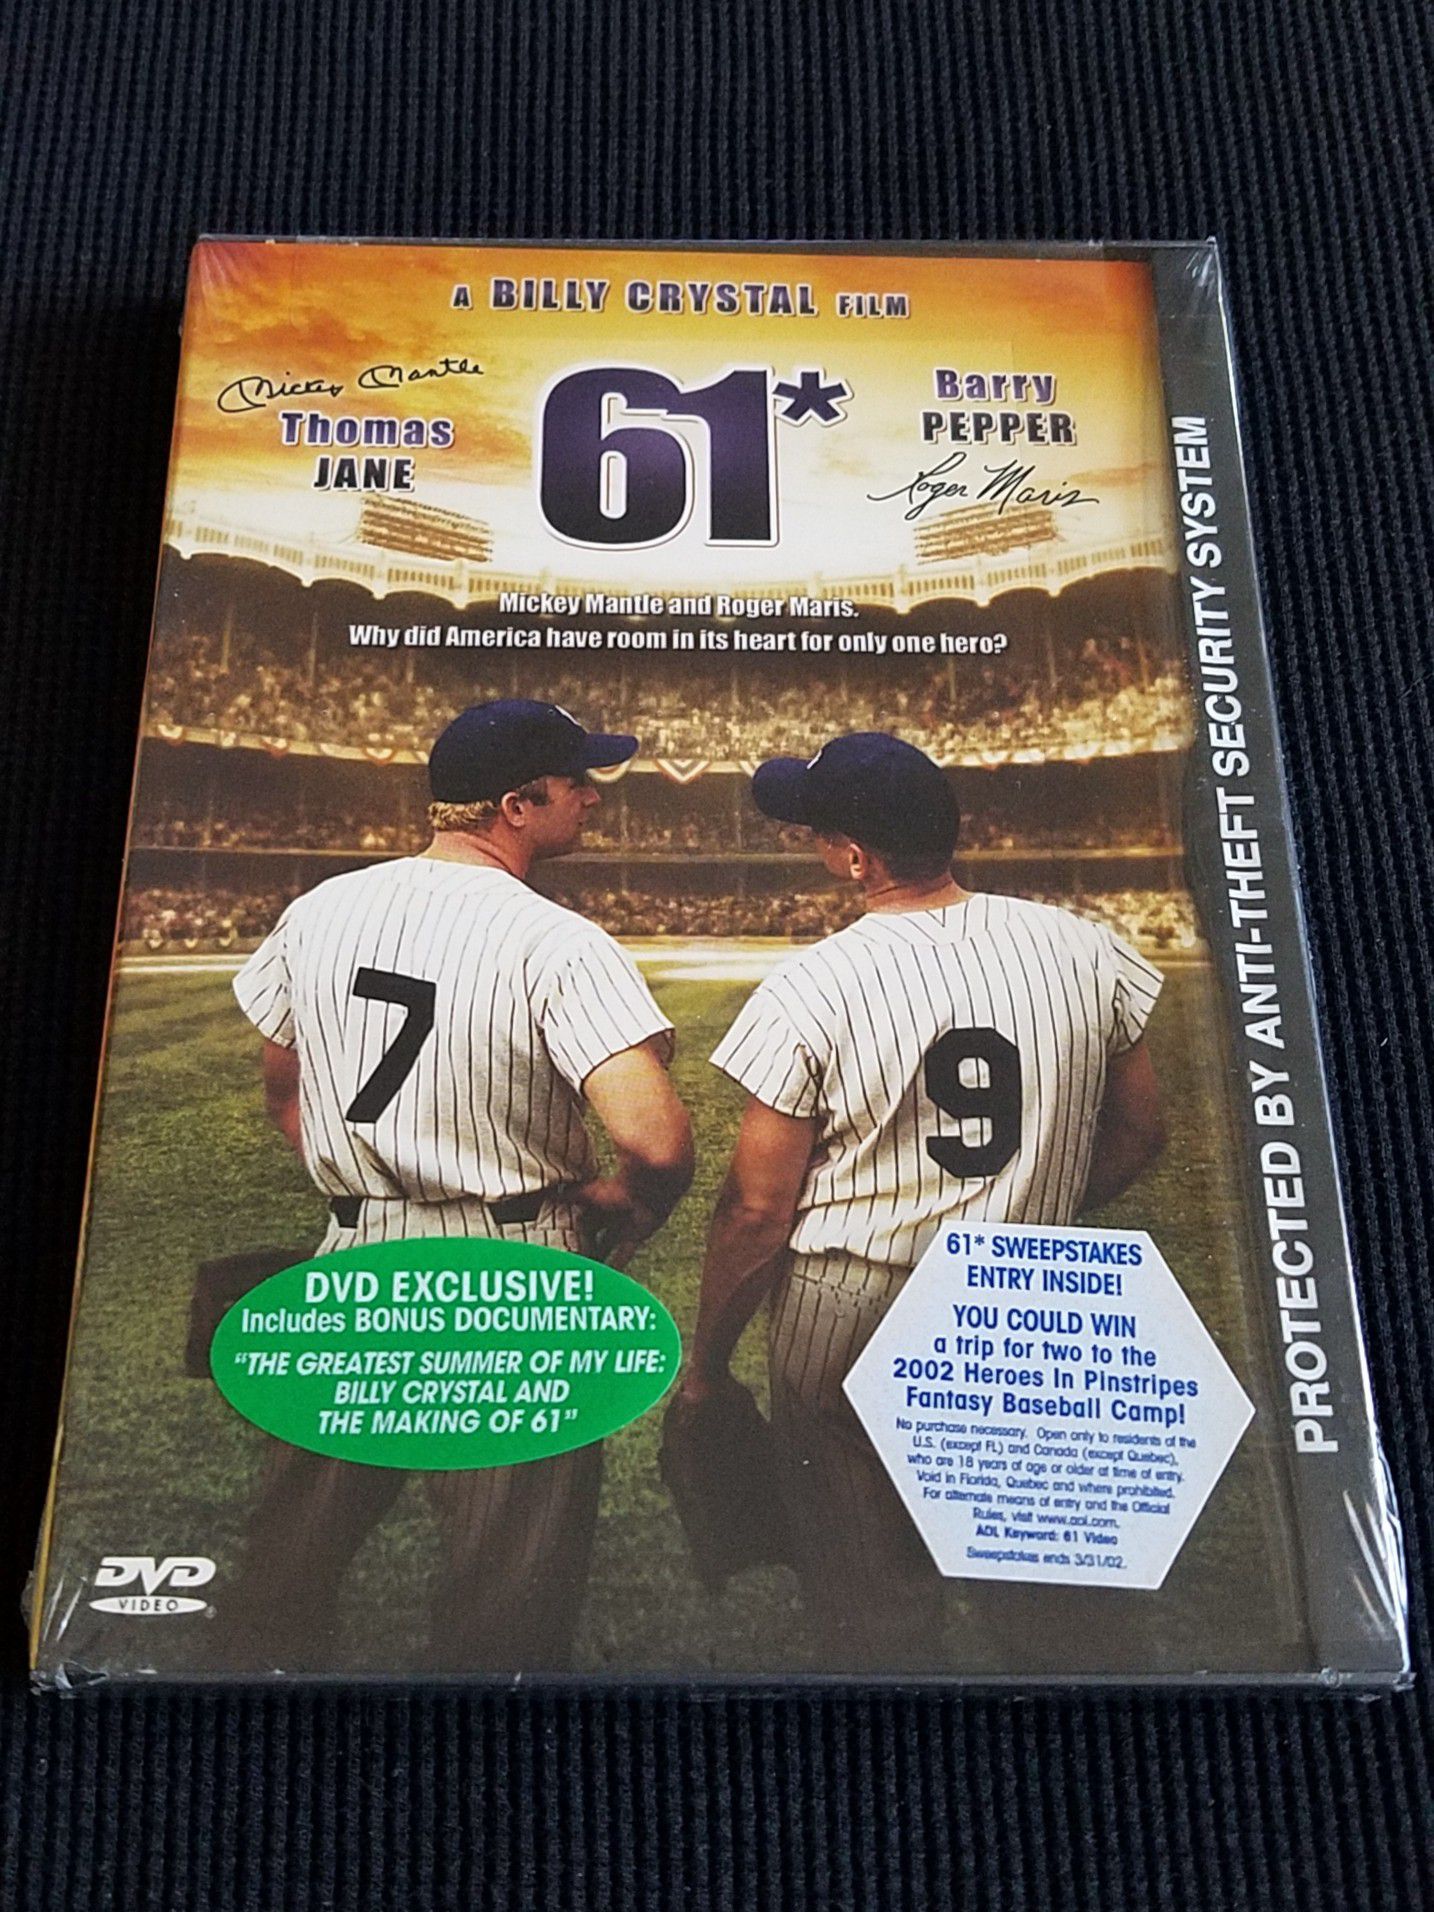 NEW! 61* A BILLY CRYSTAL 2001 FILM Mickey Mantle & Roger Maris